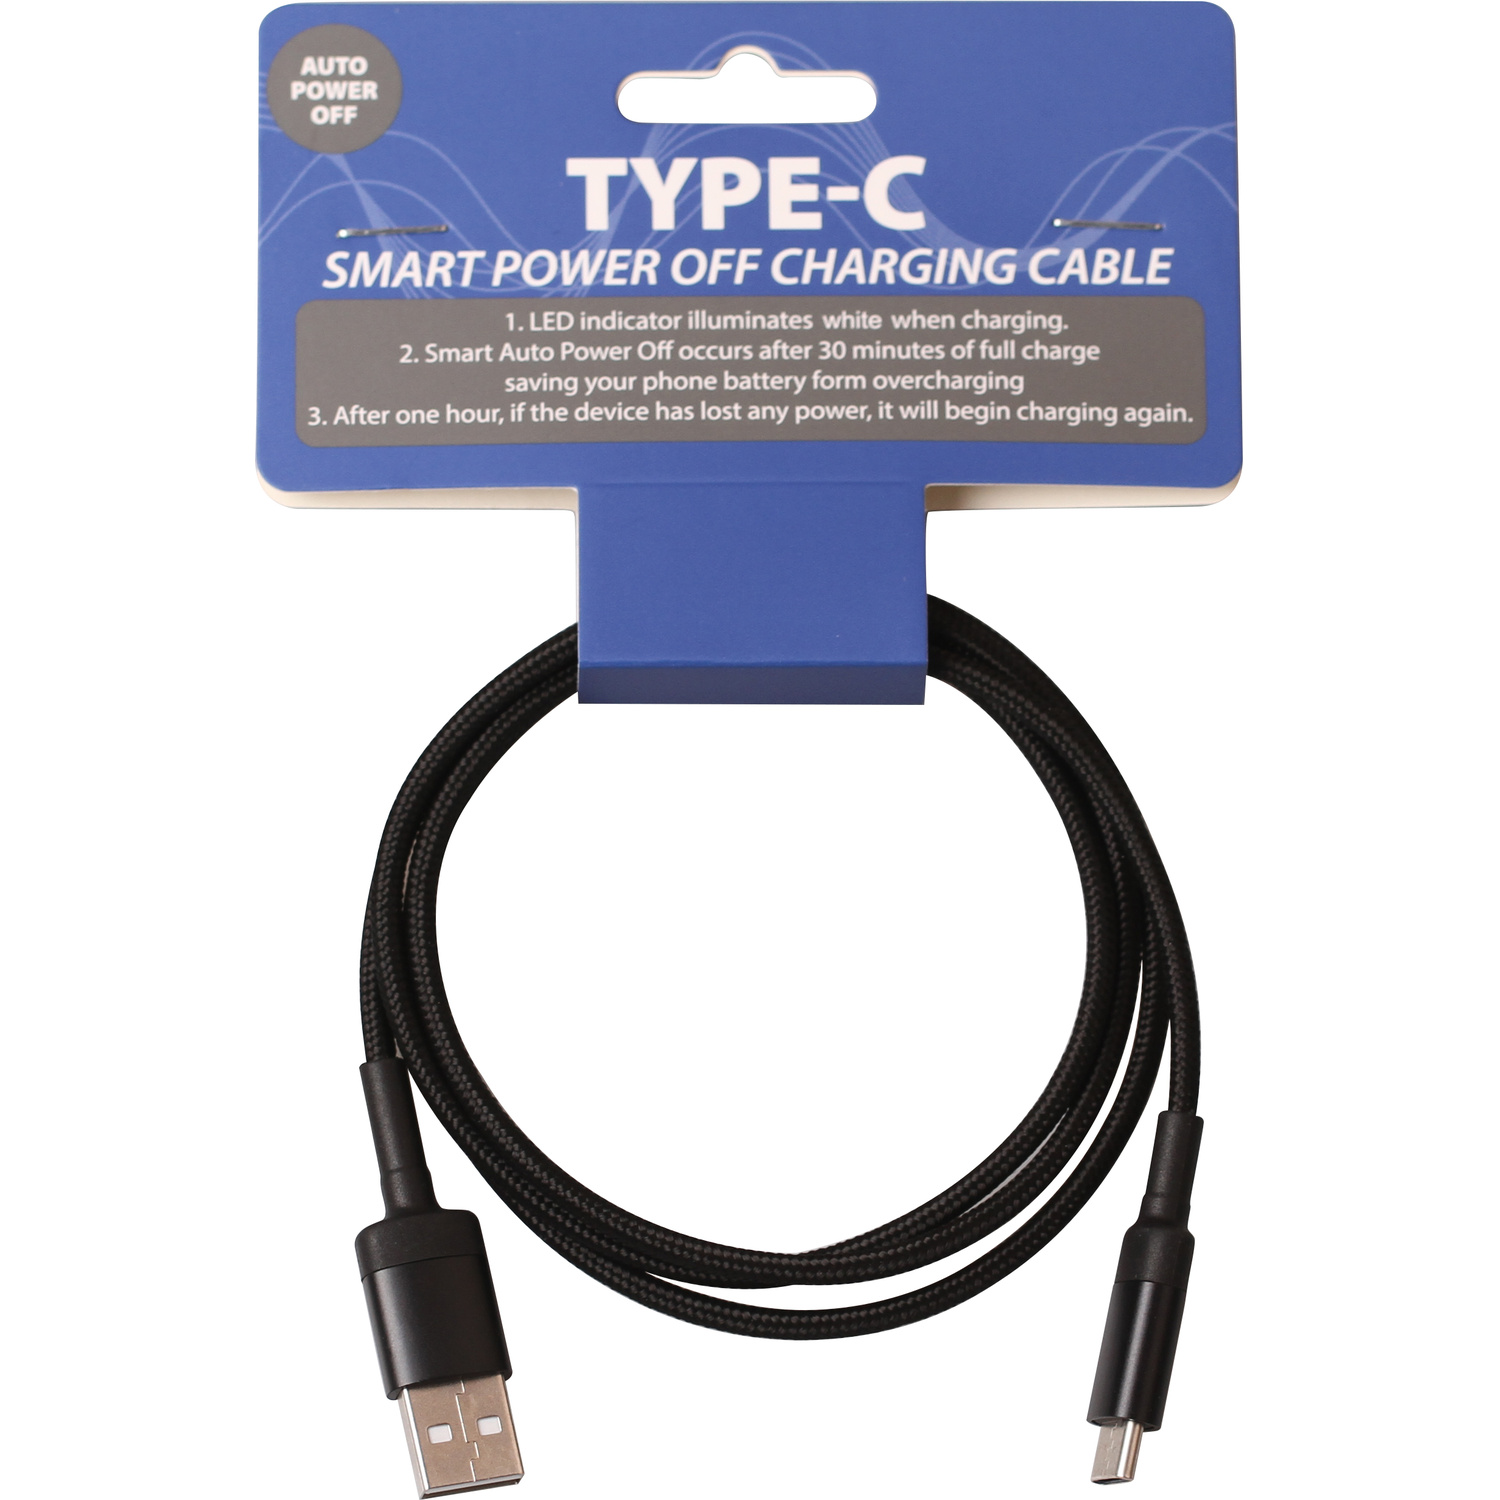 Type-C Smart Power Off Charging Cable Image